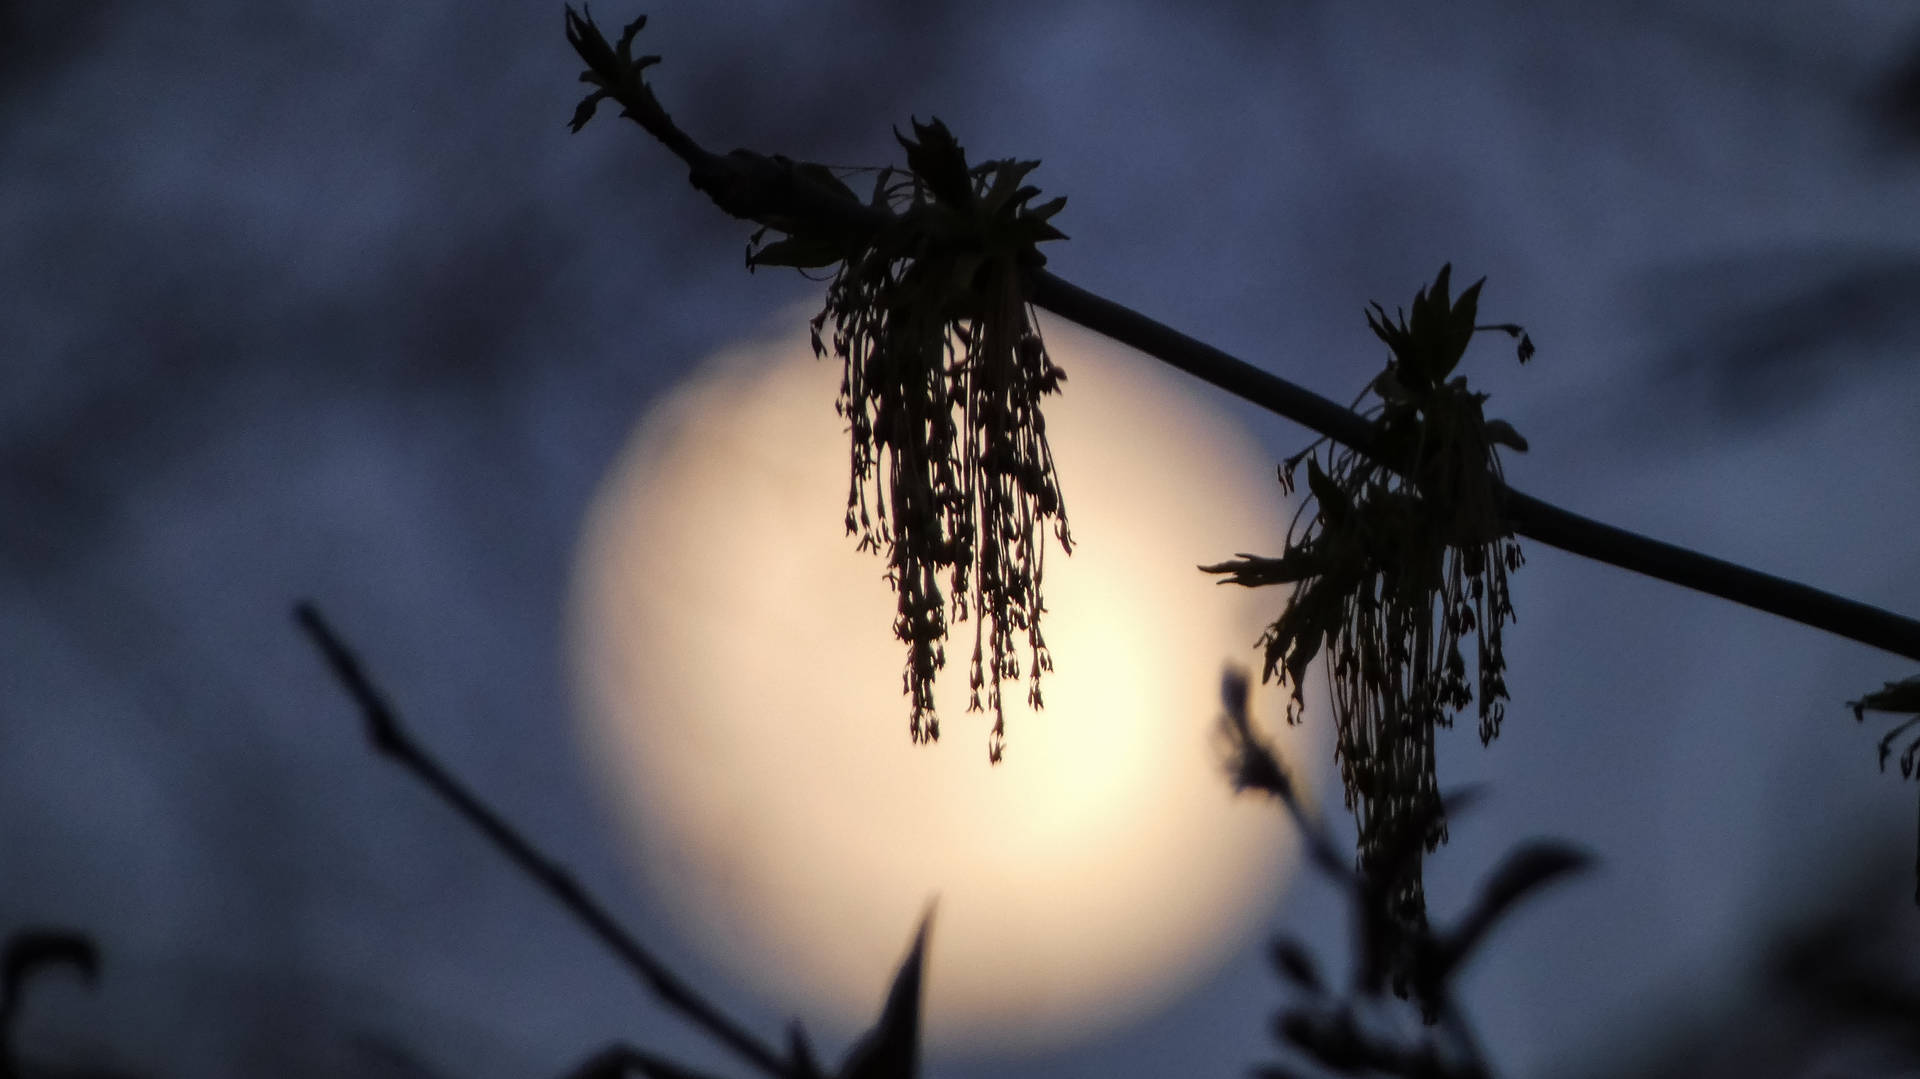 Hd Moon Behind Plant Silhouettes